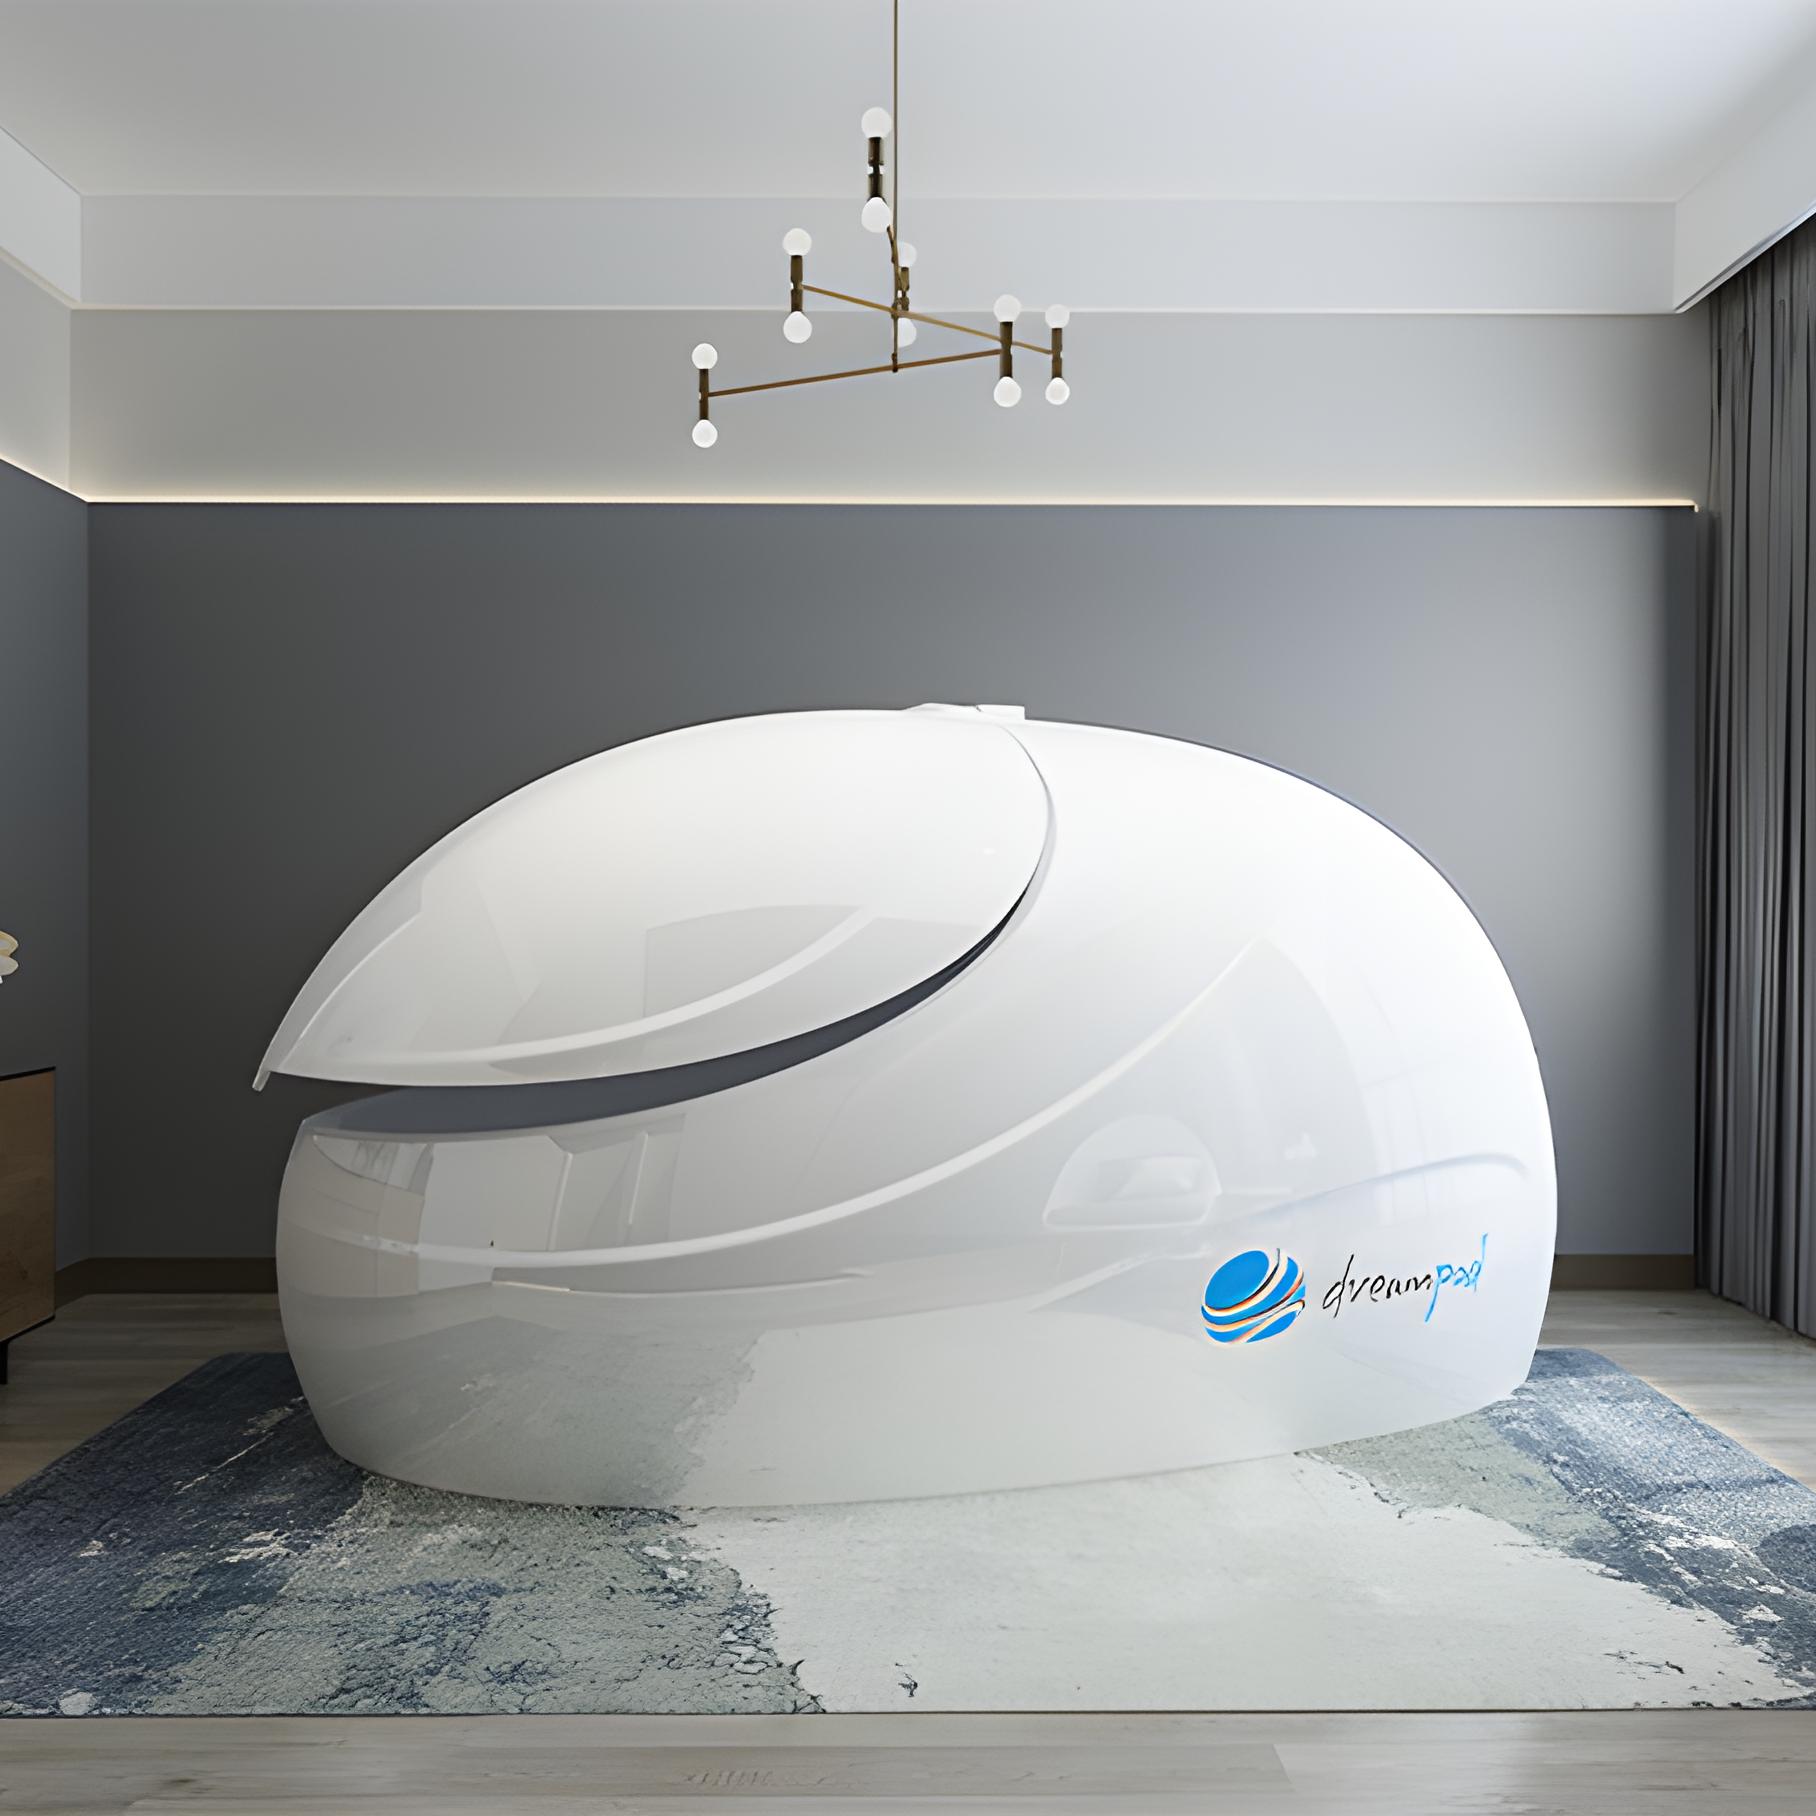 Dreampod Sport Float Pod - Your Gateway to Float Therapy